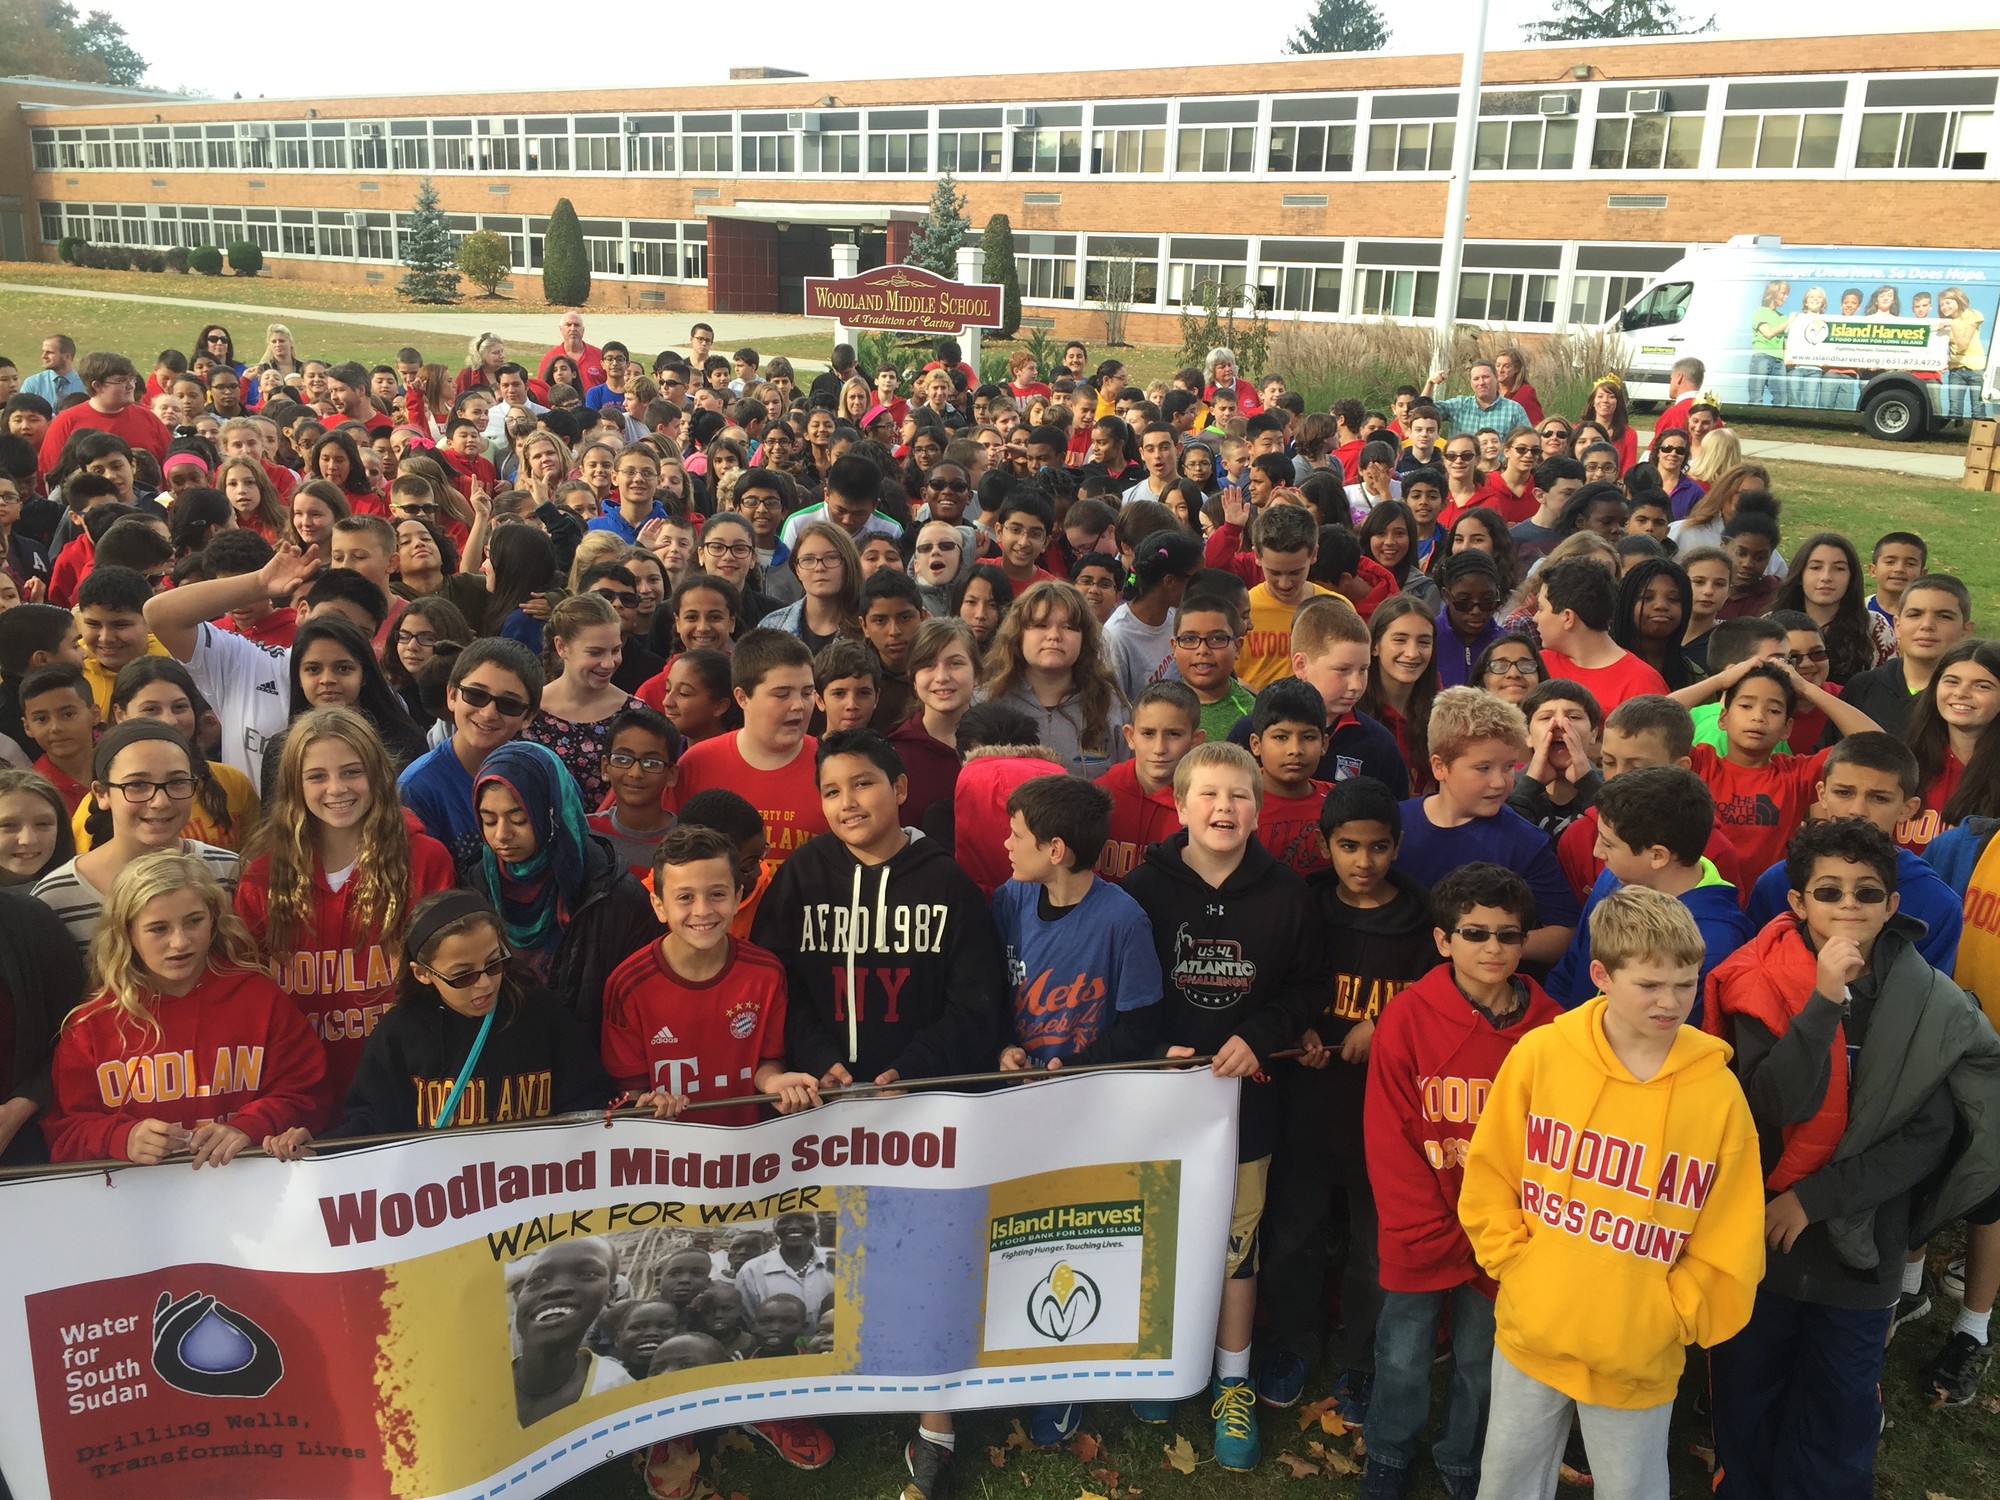 Woodland Middle School seventh-graders participated in the Walk for Water on Nov. 2, collecting food and water for Island Harvest.